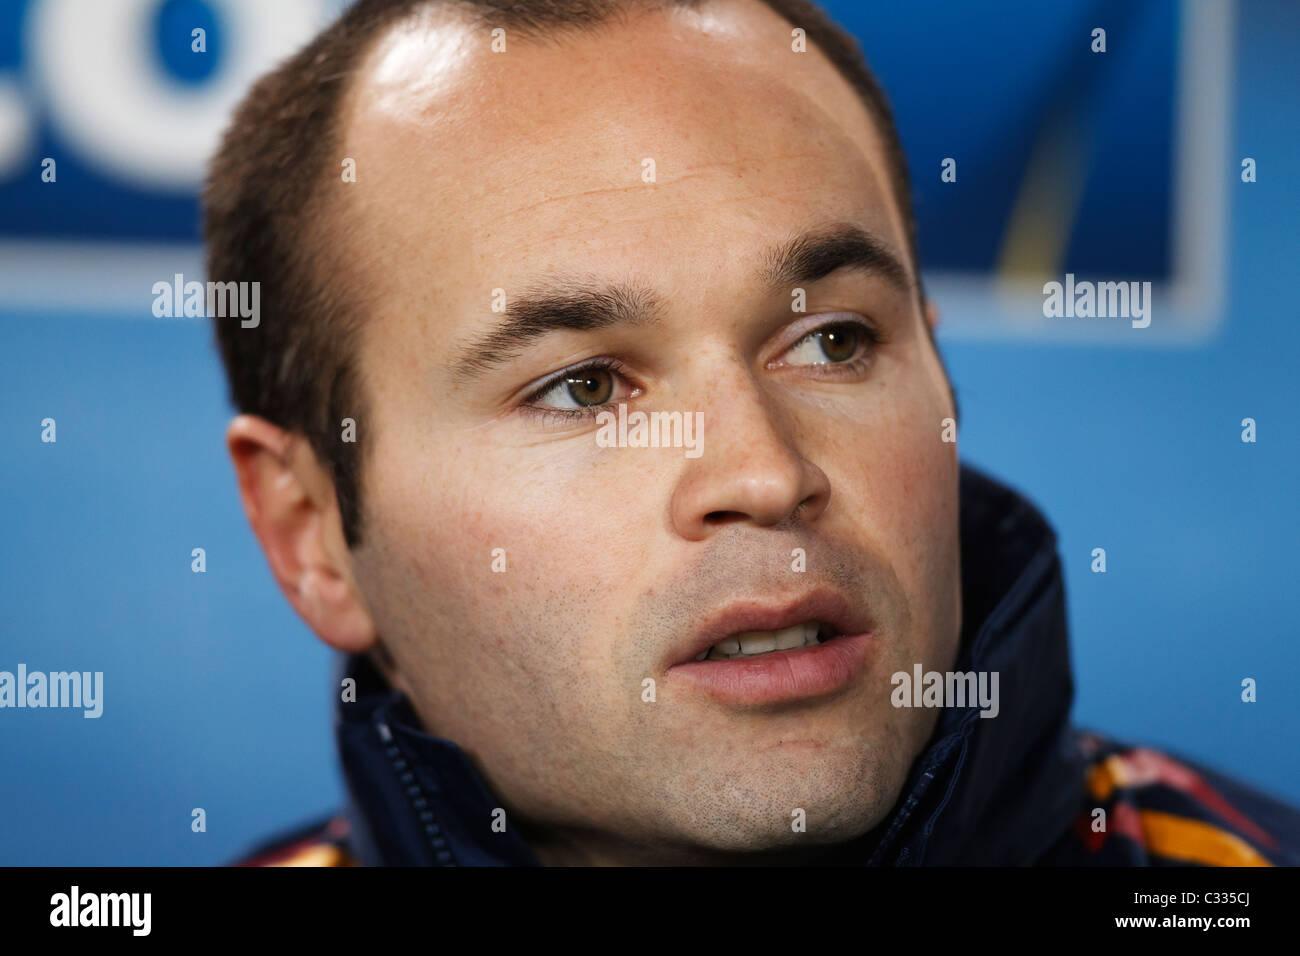 Andres Iniesta of Spain on the team bench prior to a 2010 FIFA World Cup Group H match against Honduras June 21, 2010. Stock Photo